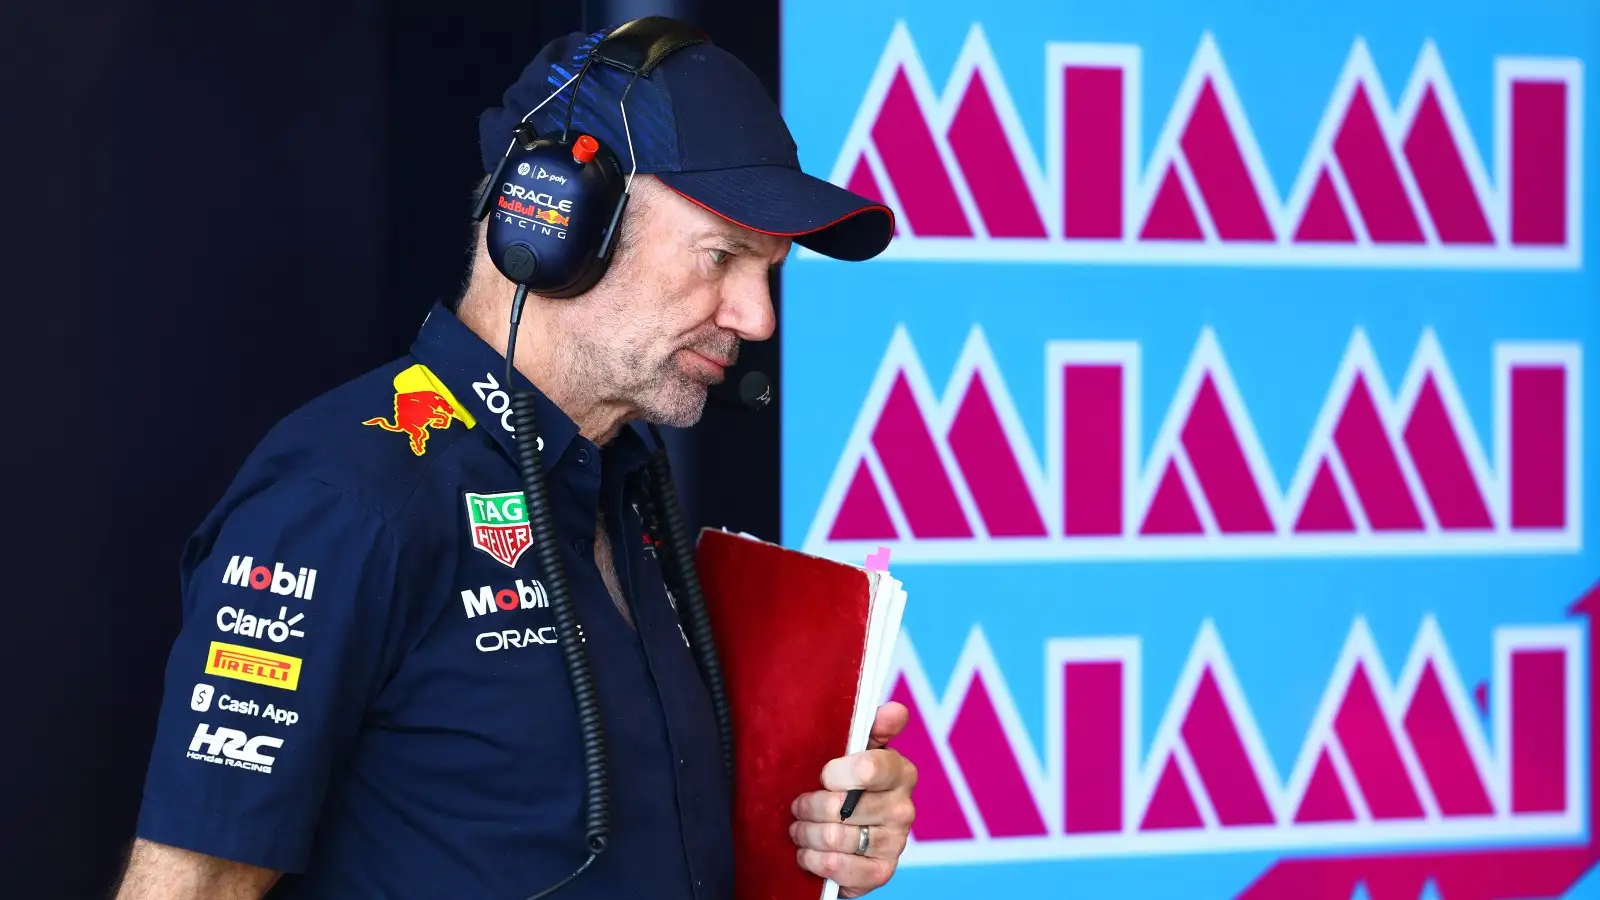 How Adrian Newey’s incredible F1 mind fixed Red Bull’s porpoising issues